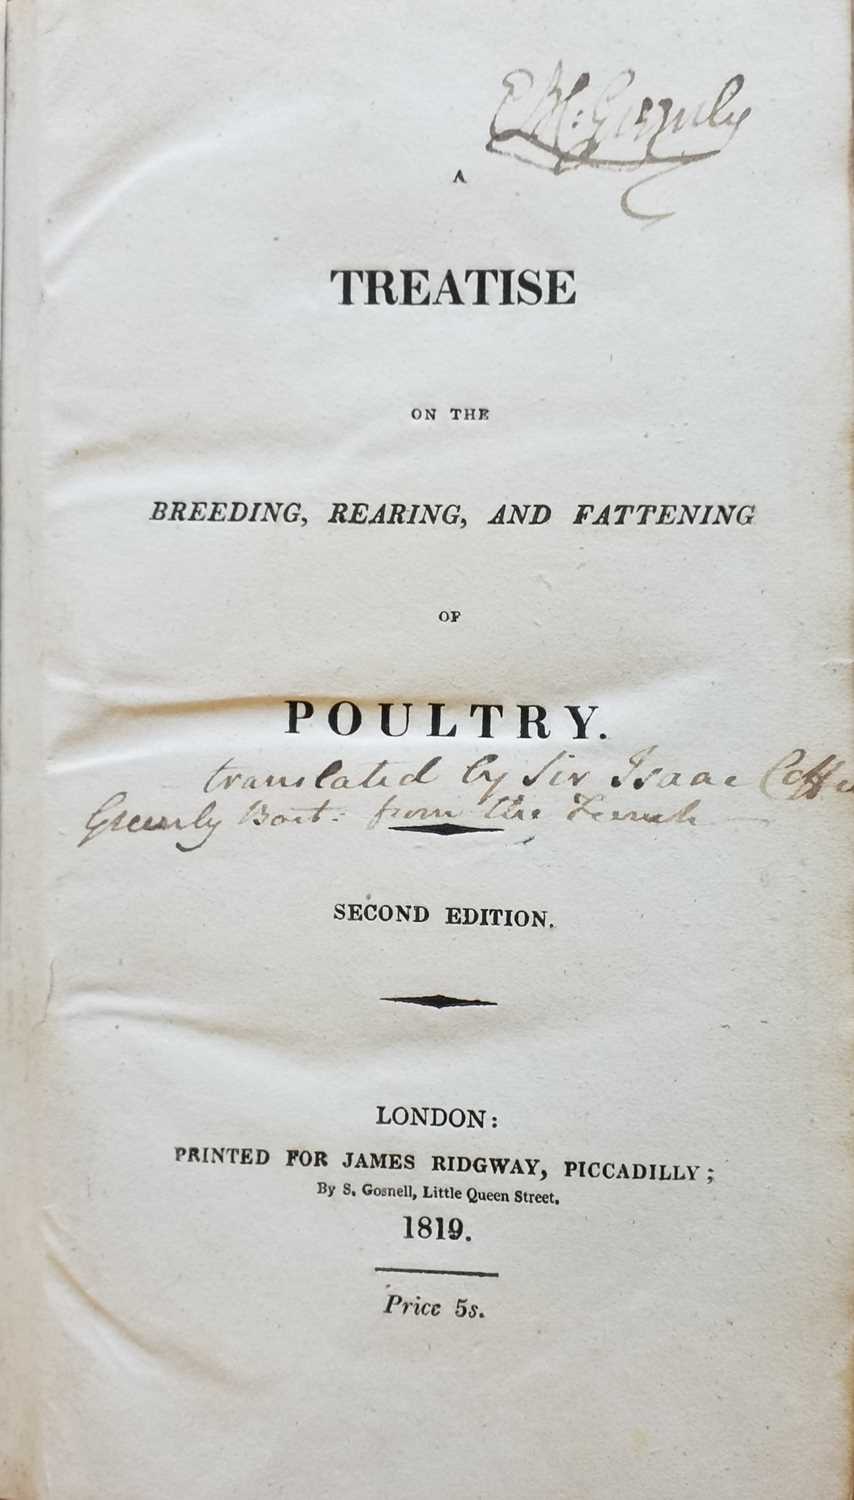 Lot 429 - [Sonnini, Charles]. A treatise on the breeding, rearing, and fattening of poultry, 2nd edition, 1819